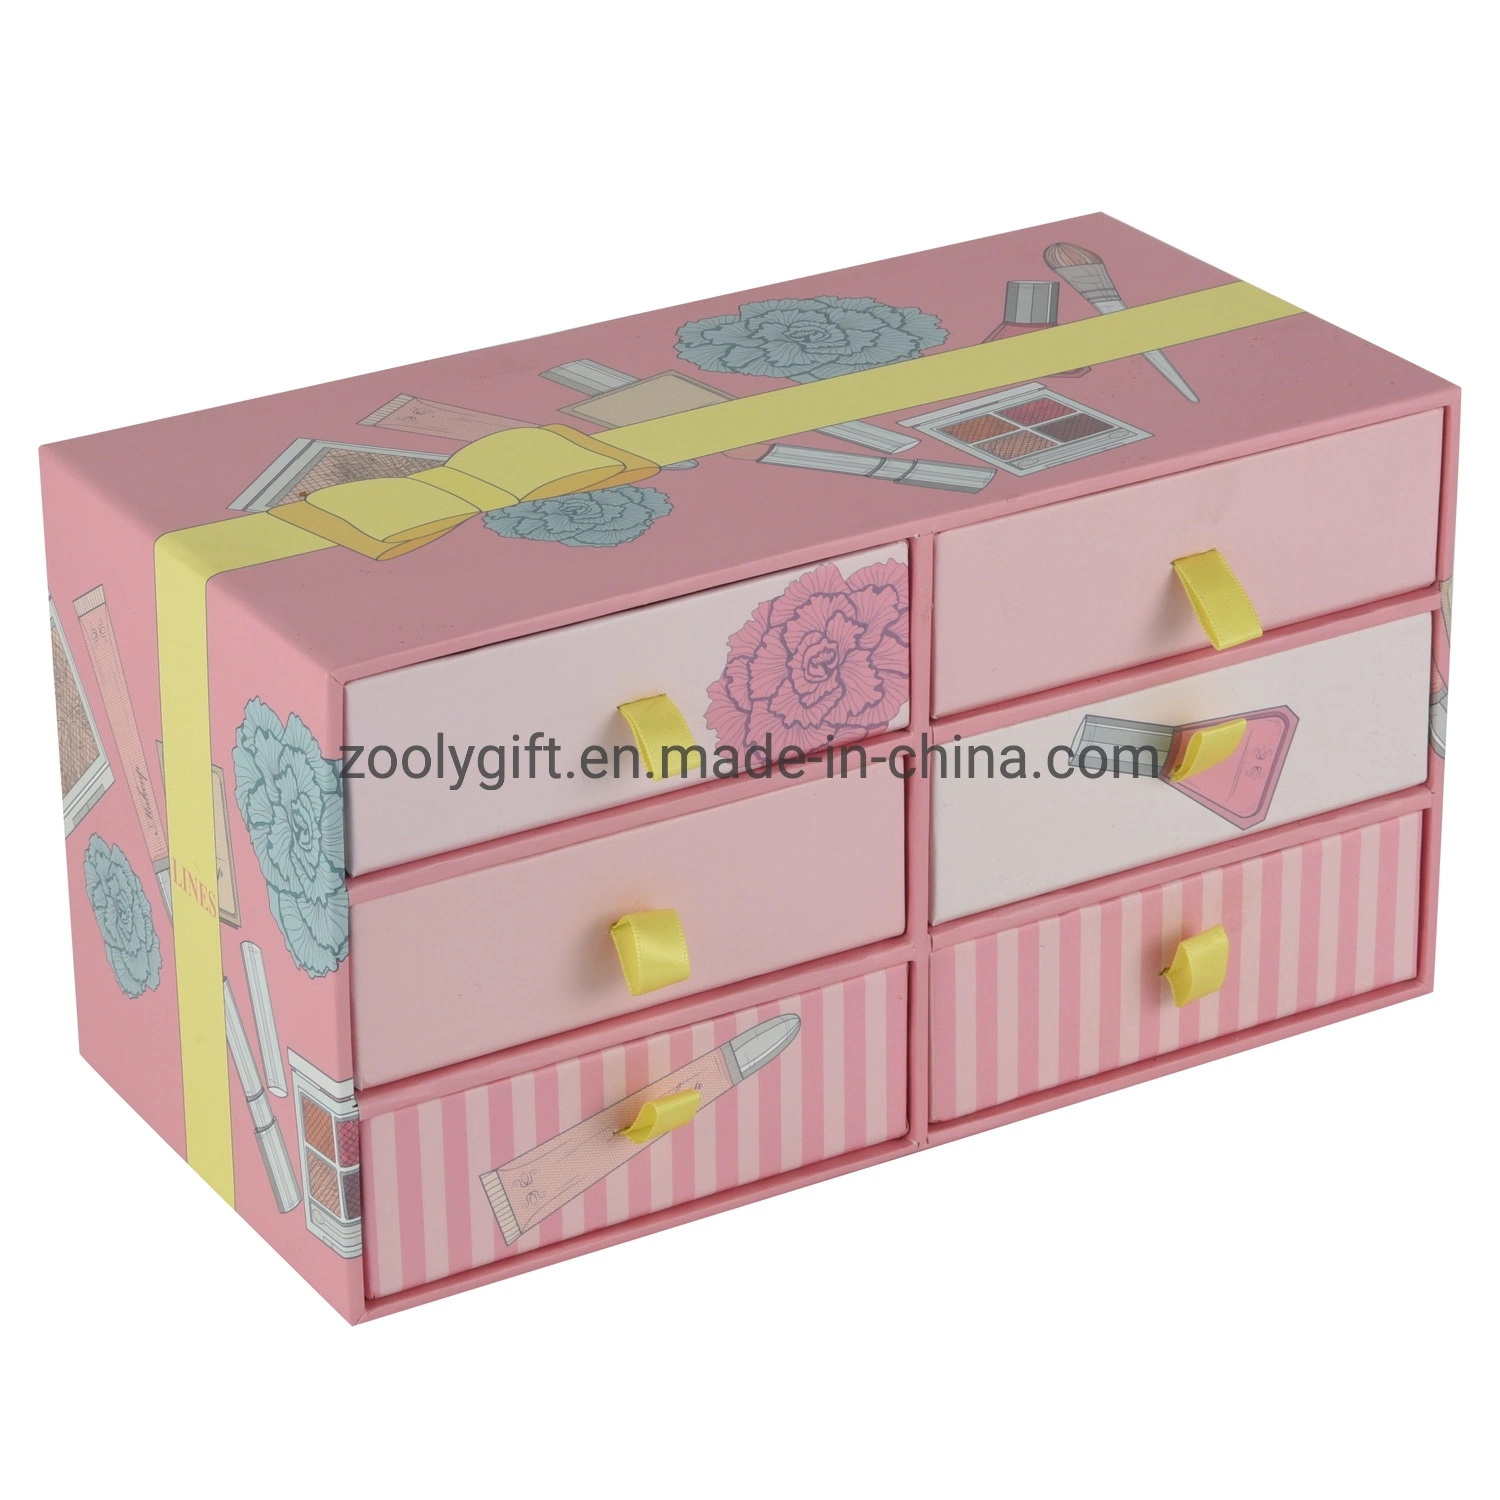 Customized Cosmetic Box with 3 Drawers Rigid Paper Drawer Box with Ribbon Makeup Organizer Storage Box Promotional Paper Gift Boxes Jewelry Drawer Box